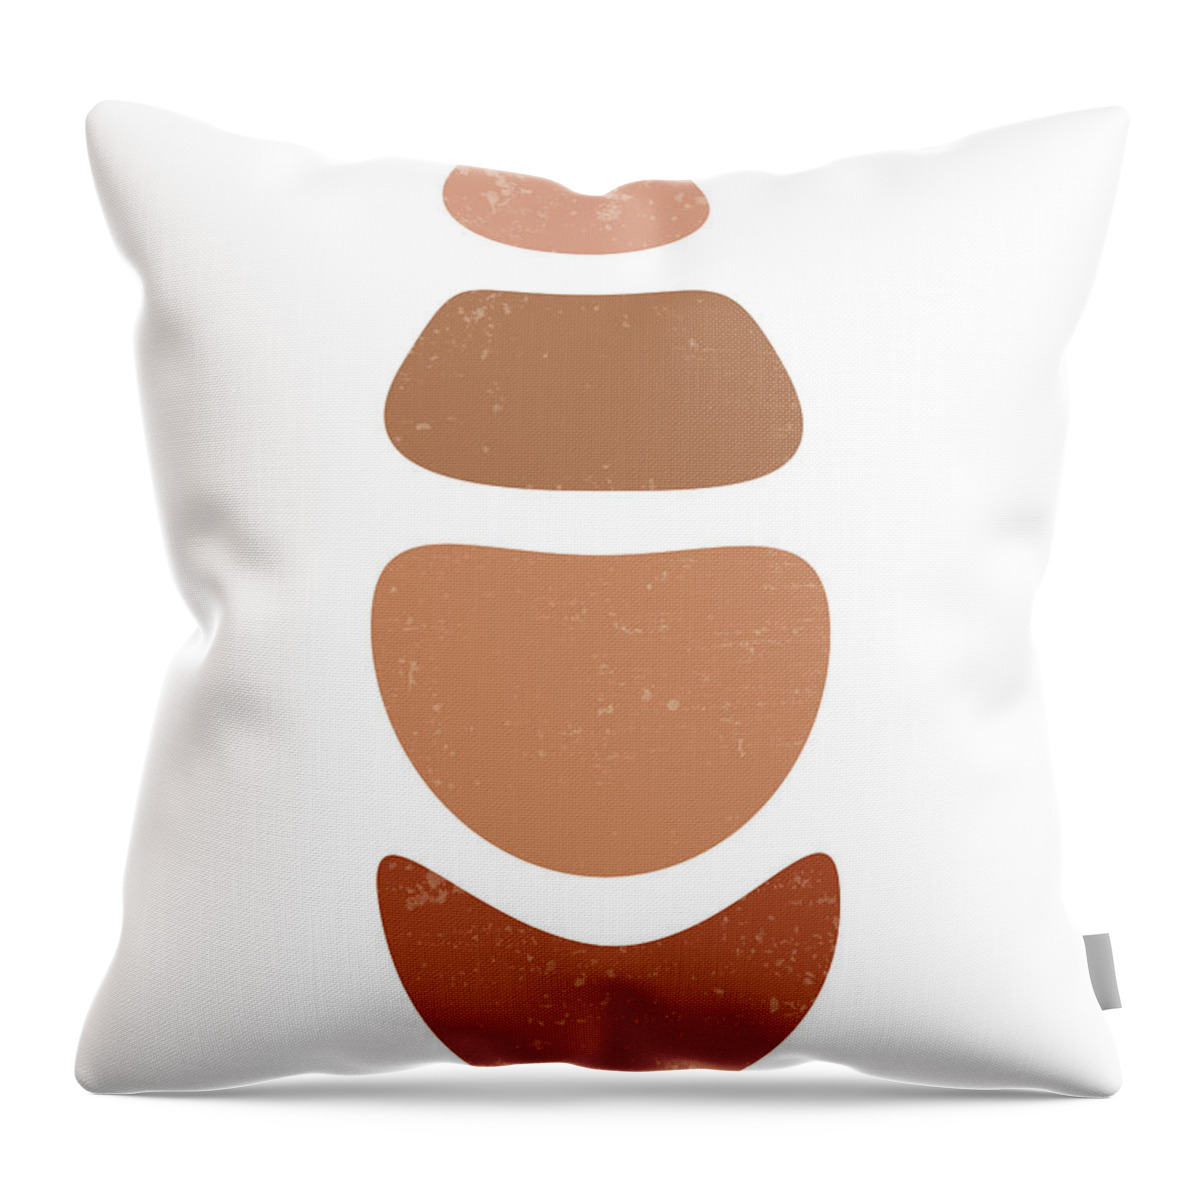 Terracotta Throw Pillow featuring the mixed media Terracotta Abstract 20 - Modern, Contemporary Art - Abstract Organic Shapes - Brown, Burnt Orange by Studio Grafiikka